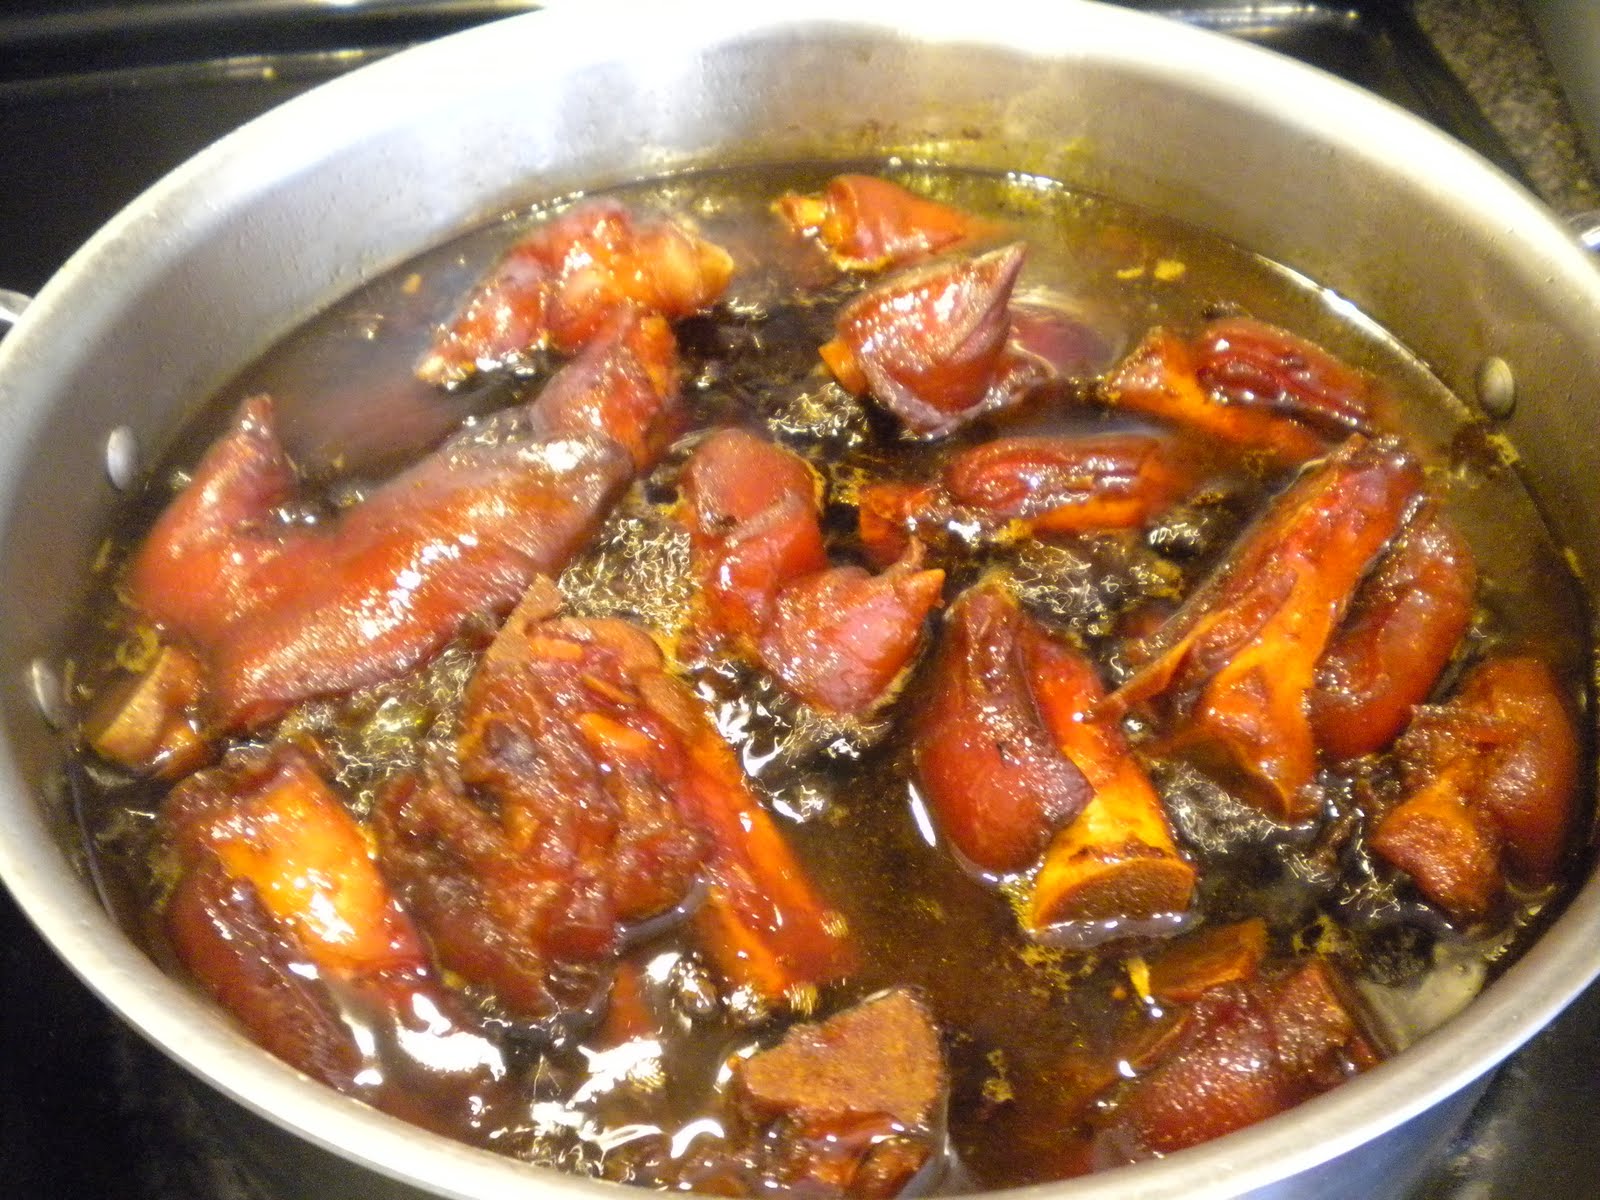 What is a recipe for fresh pork hocks?